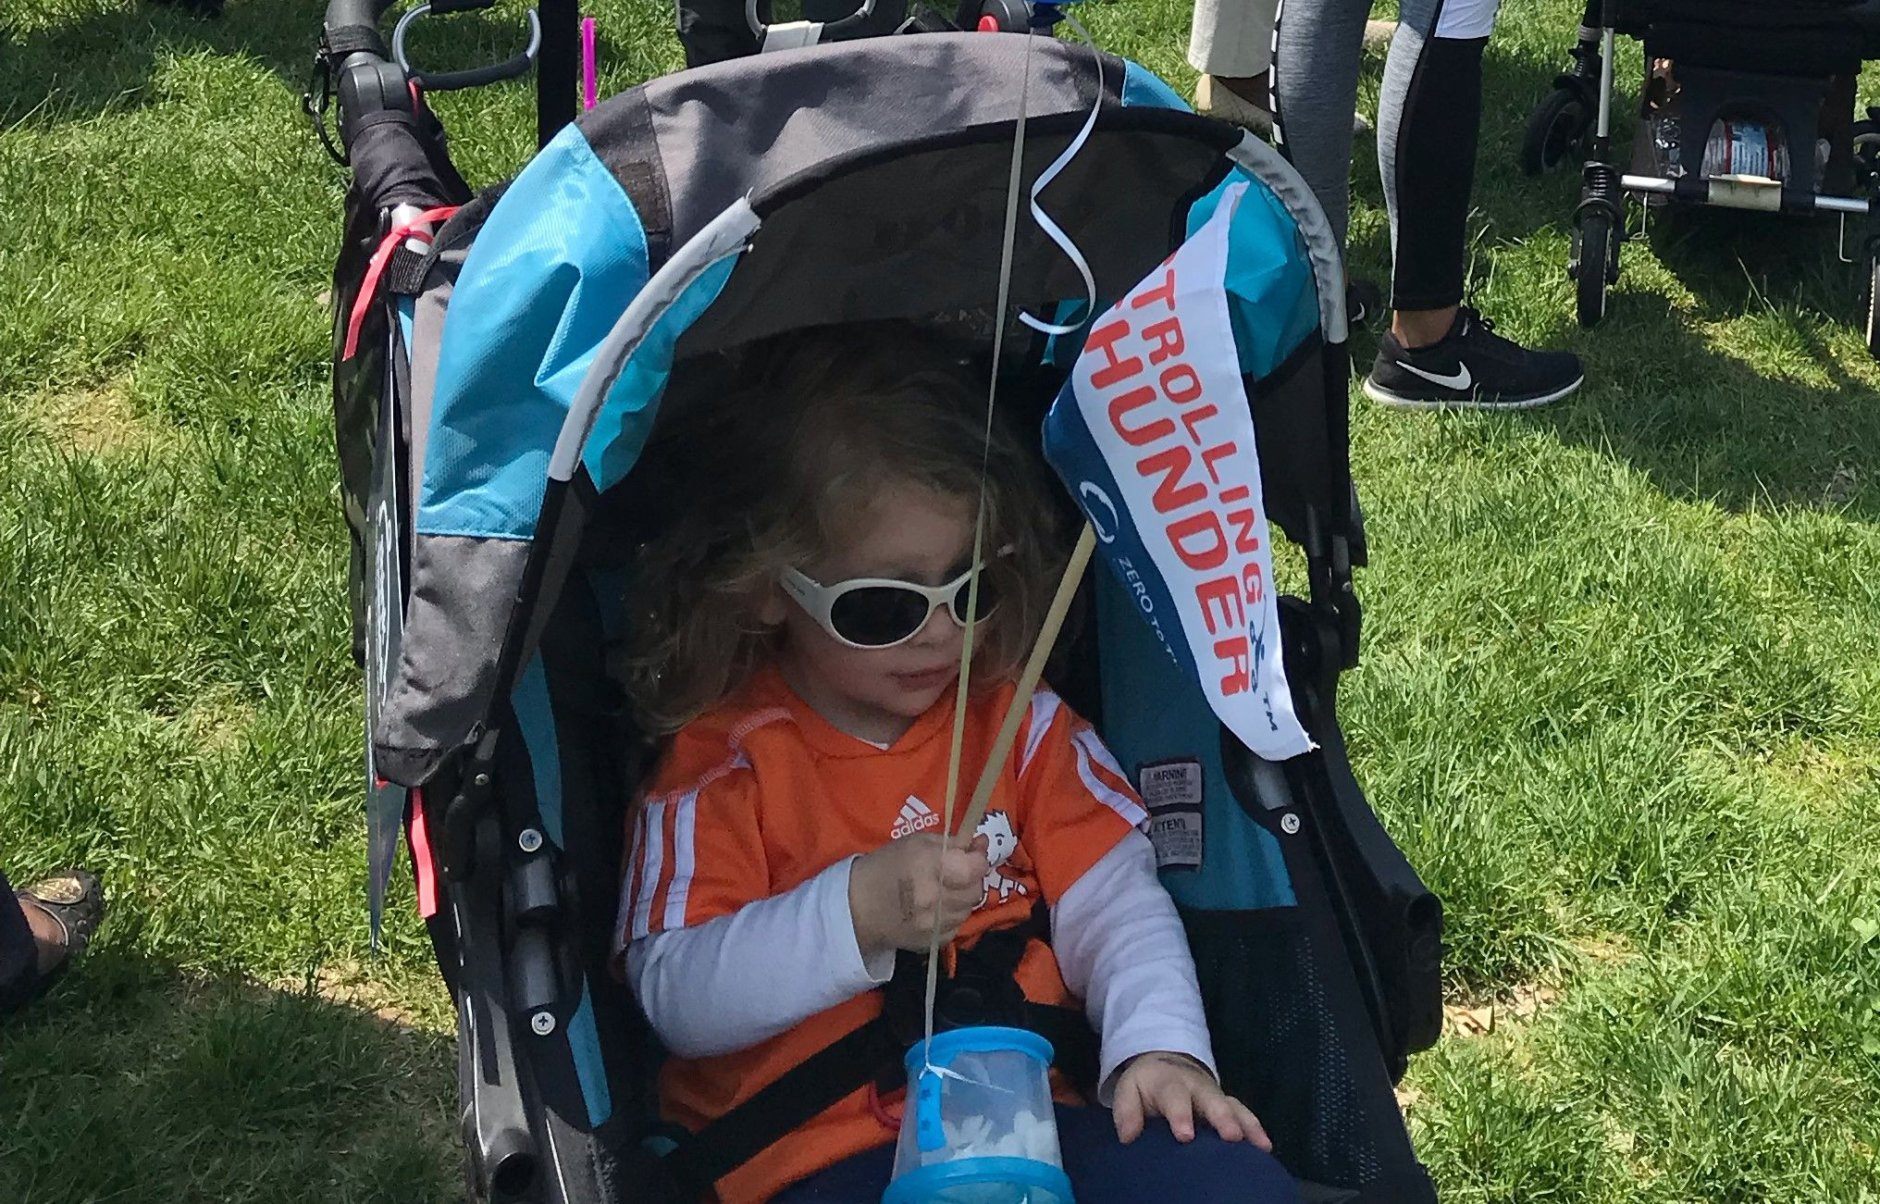 Cecily Colburn, 3, was among those who came in a stroller to the Capitol. Her father Casey says he and his wife Rochelle, a Hill staffer, were never able to get the congressional day care that’s offered. They were too low on a waiting list. (WTOP/Mitchell Miller)